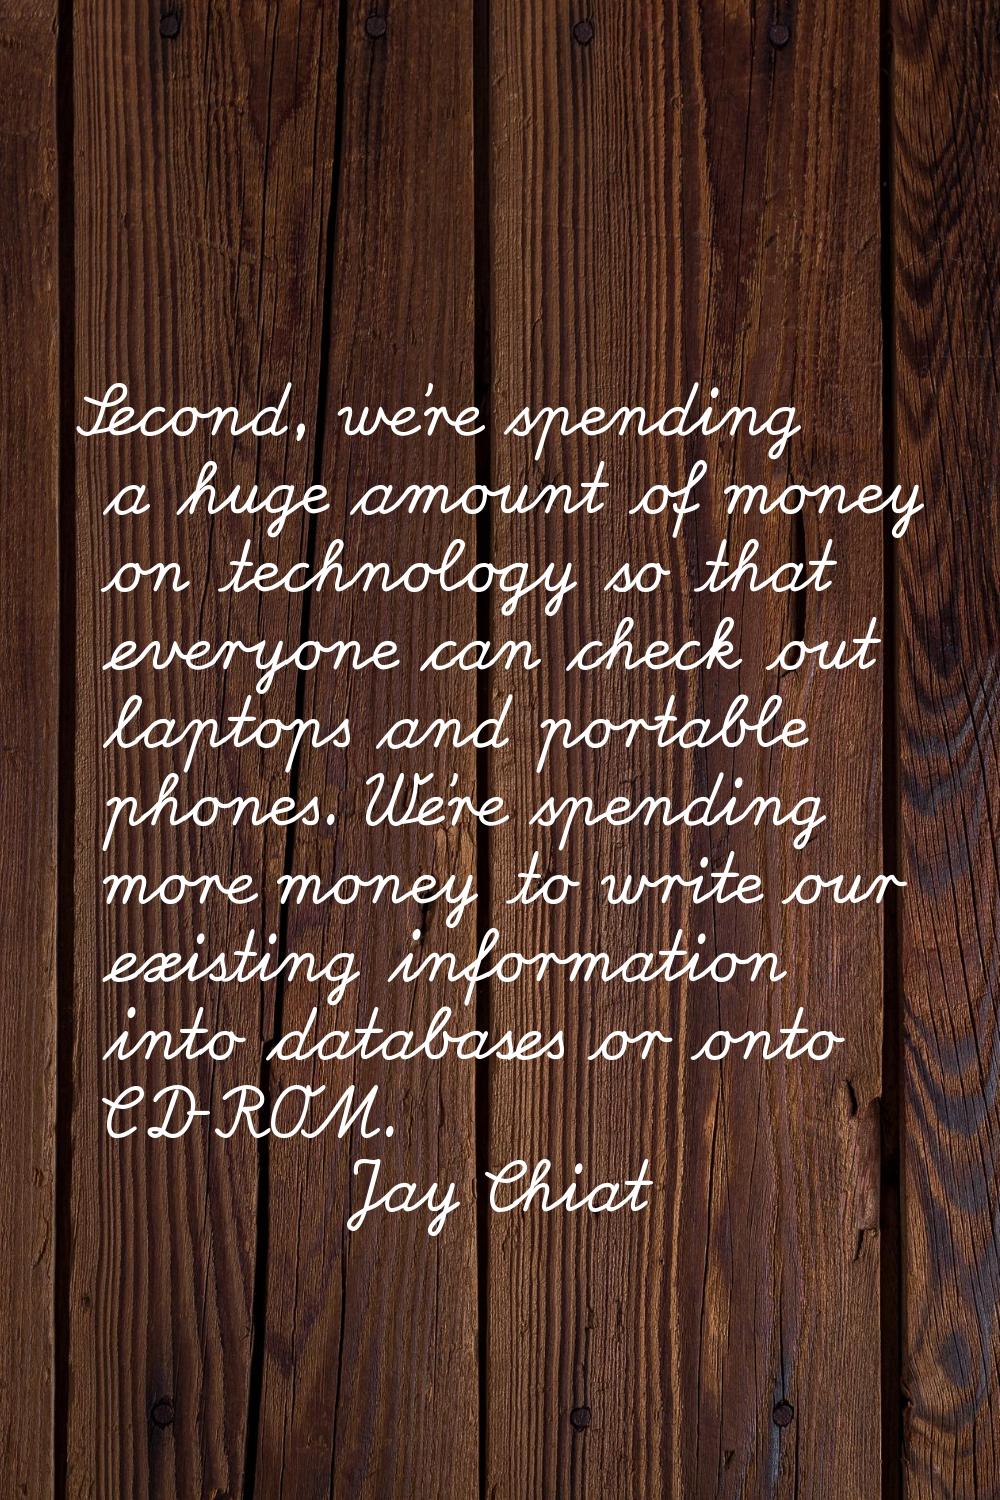 Second, we're spending a huge amount of money on technology so that everyone can check out laptops 